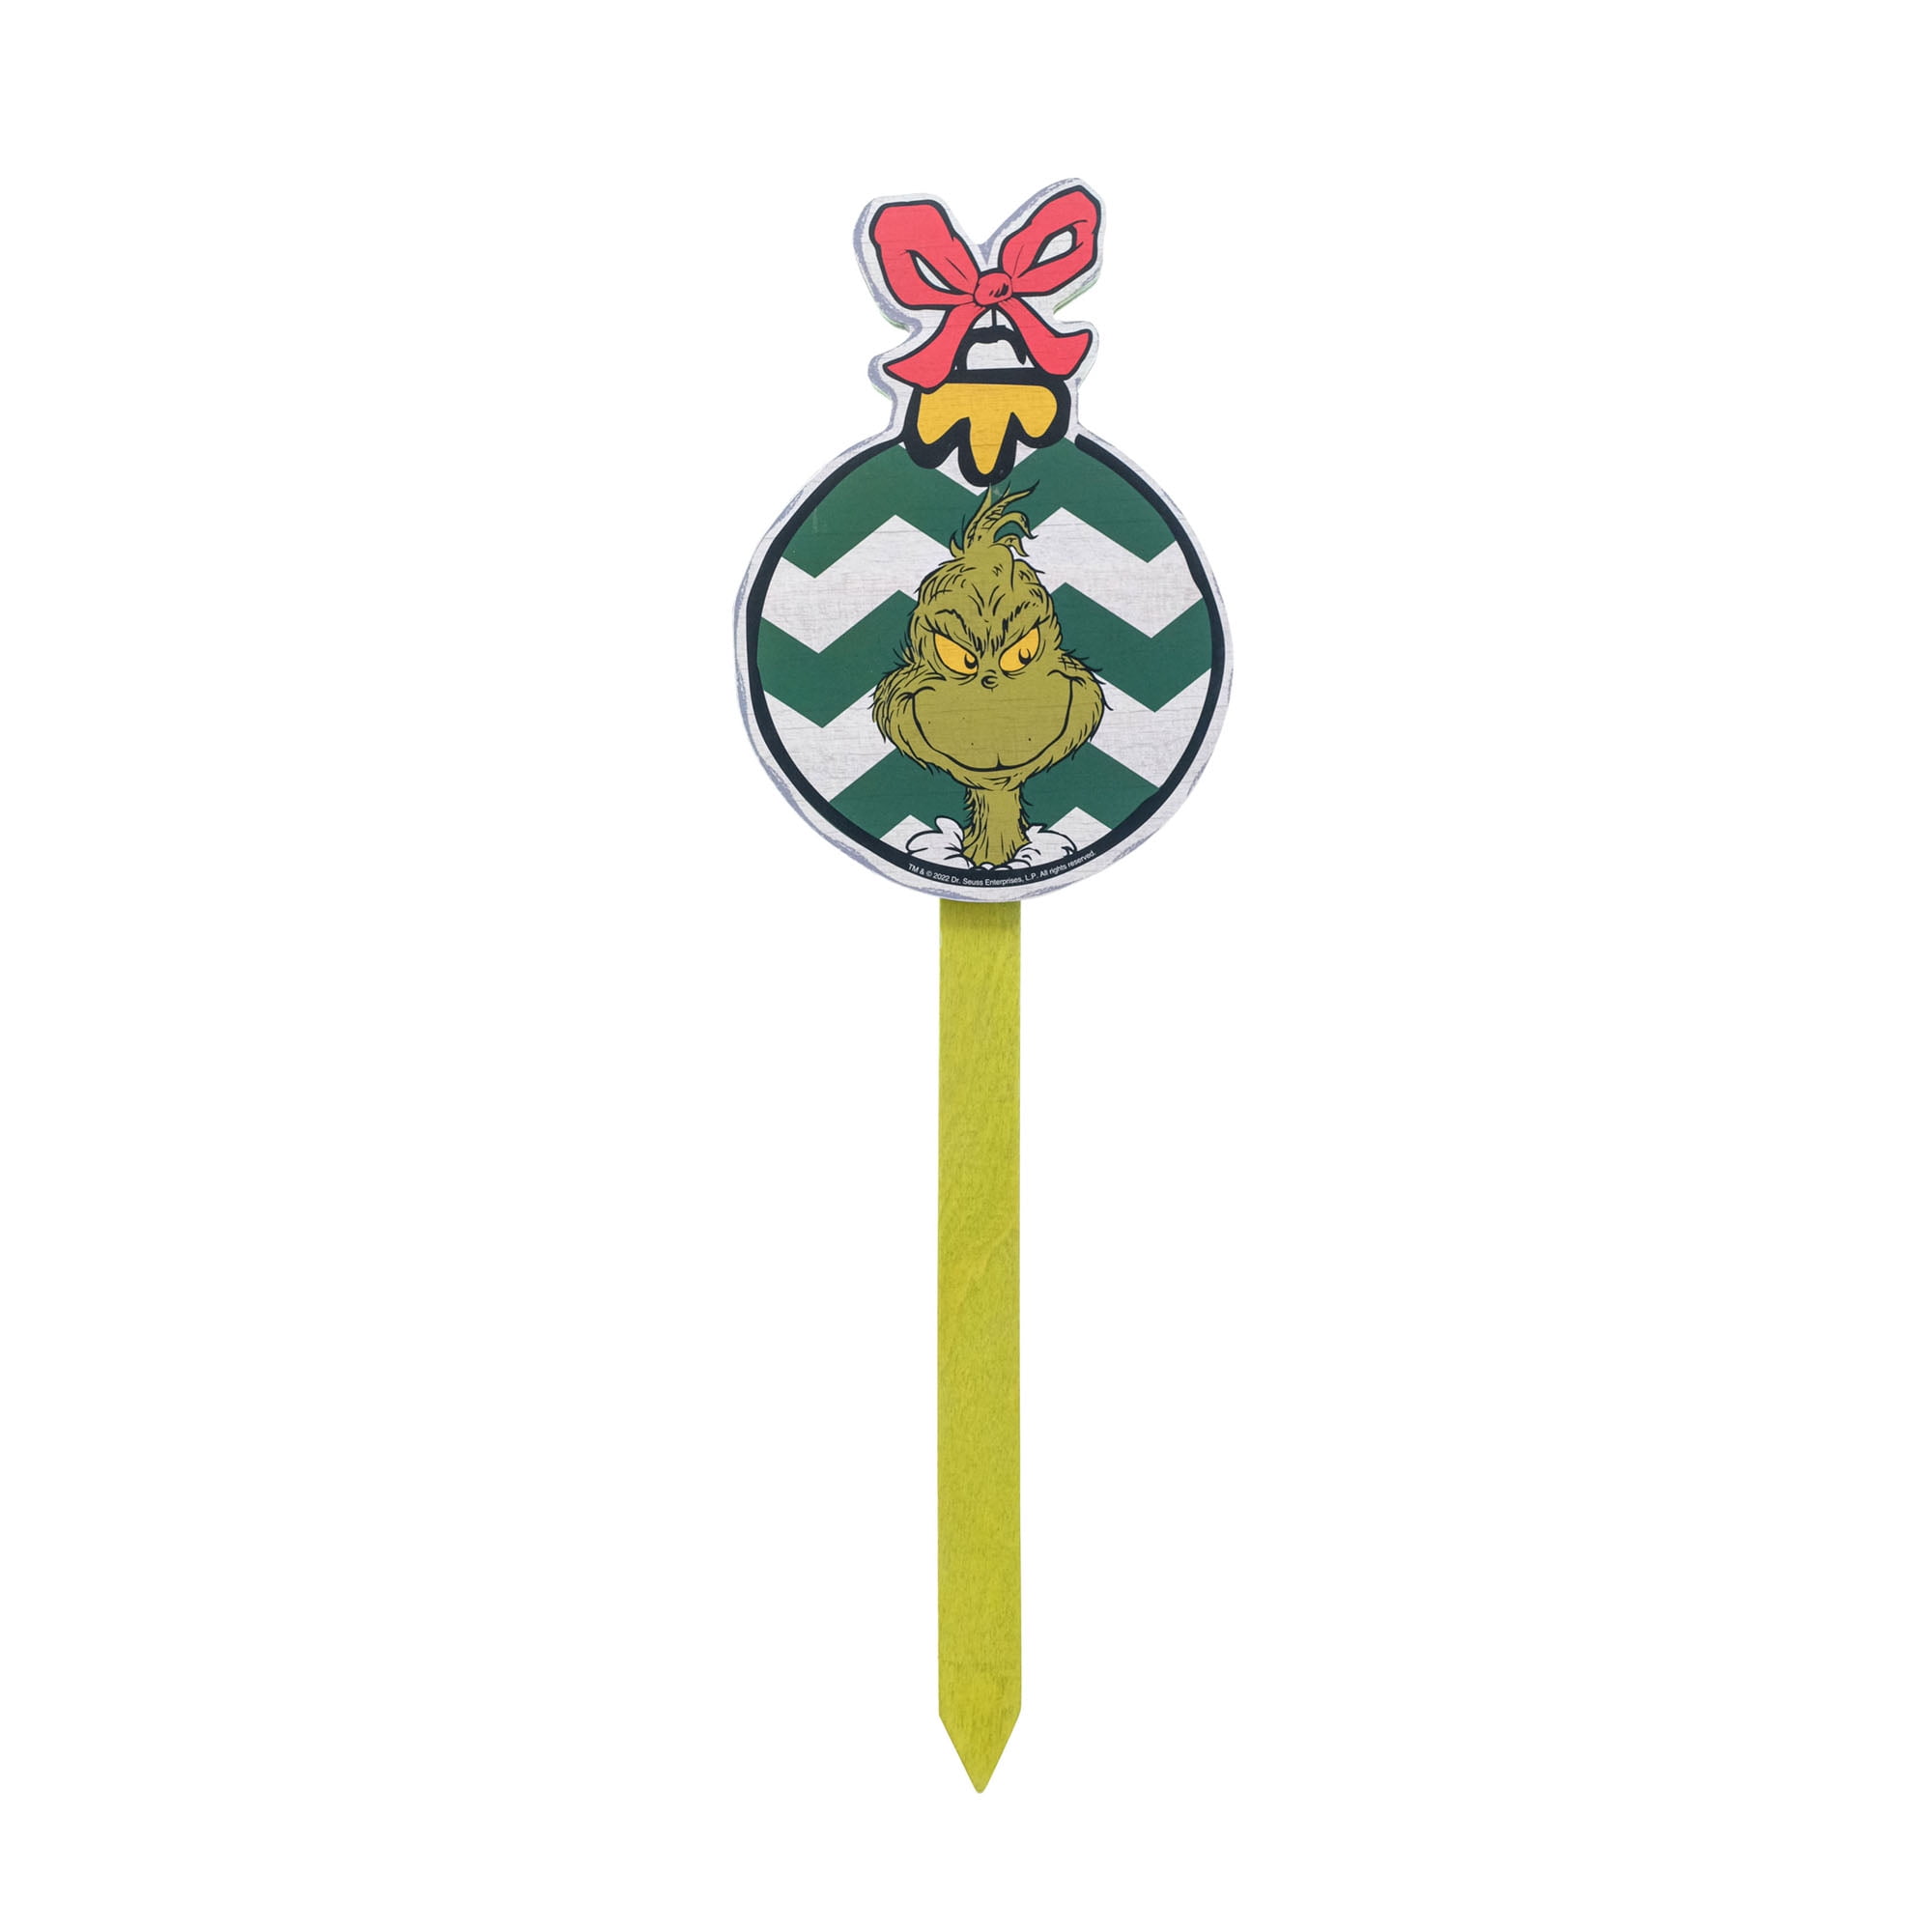 Dr Seuss' The Grinch Who Stole Christmas, Grinch Ornament, 15 inch Tall Yard Stake, MDF, Multi-Color